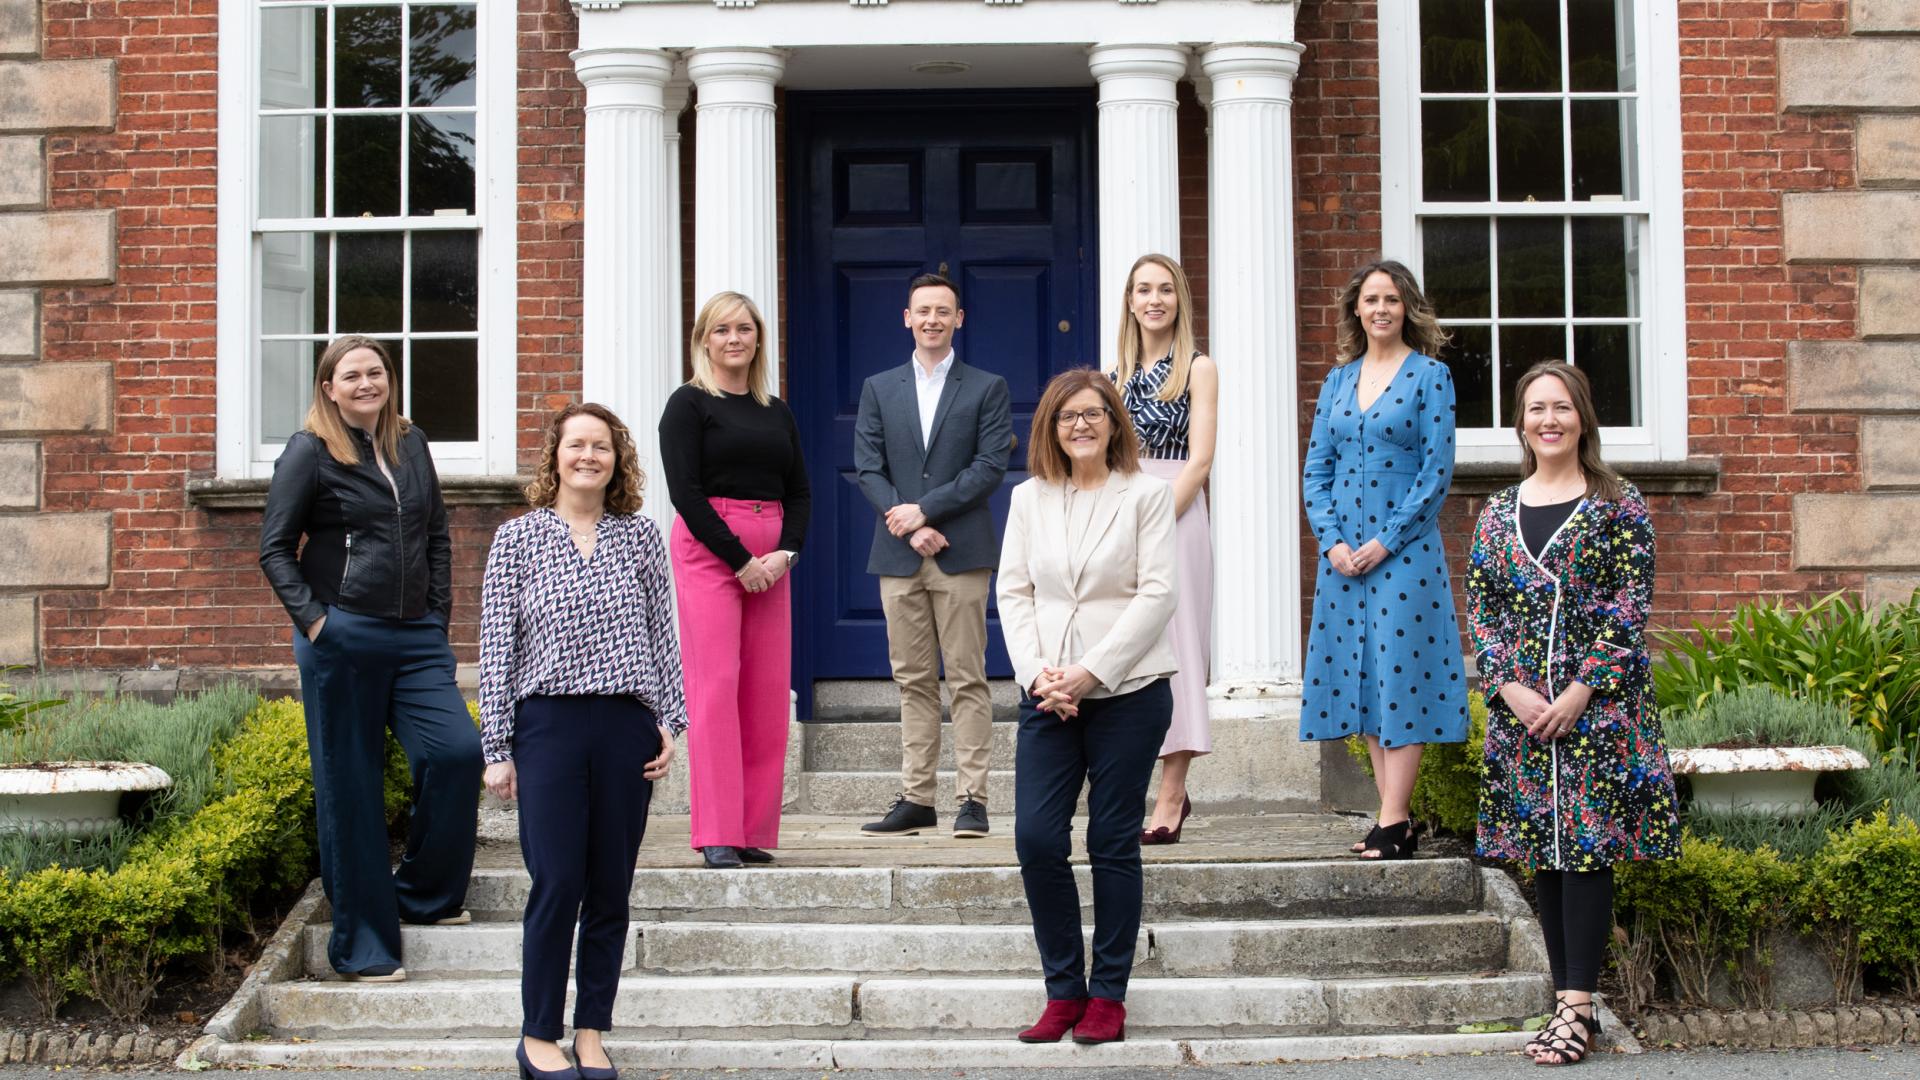 Six Teacher Fellowships awarded by DCU to support and benefit the next generation of teachers